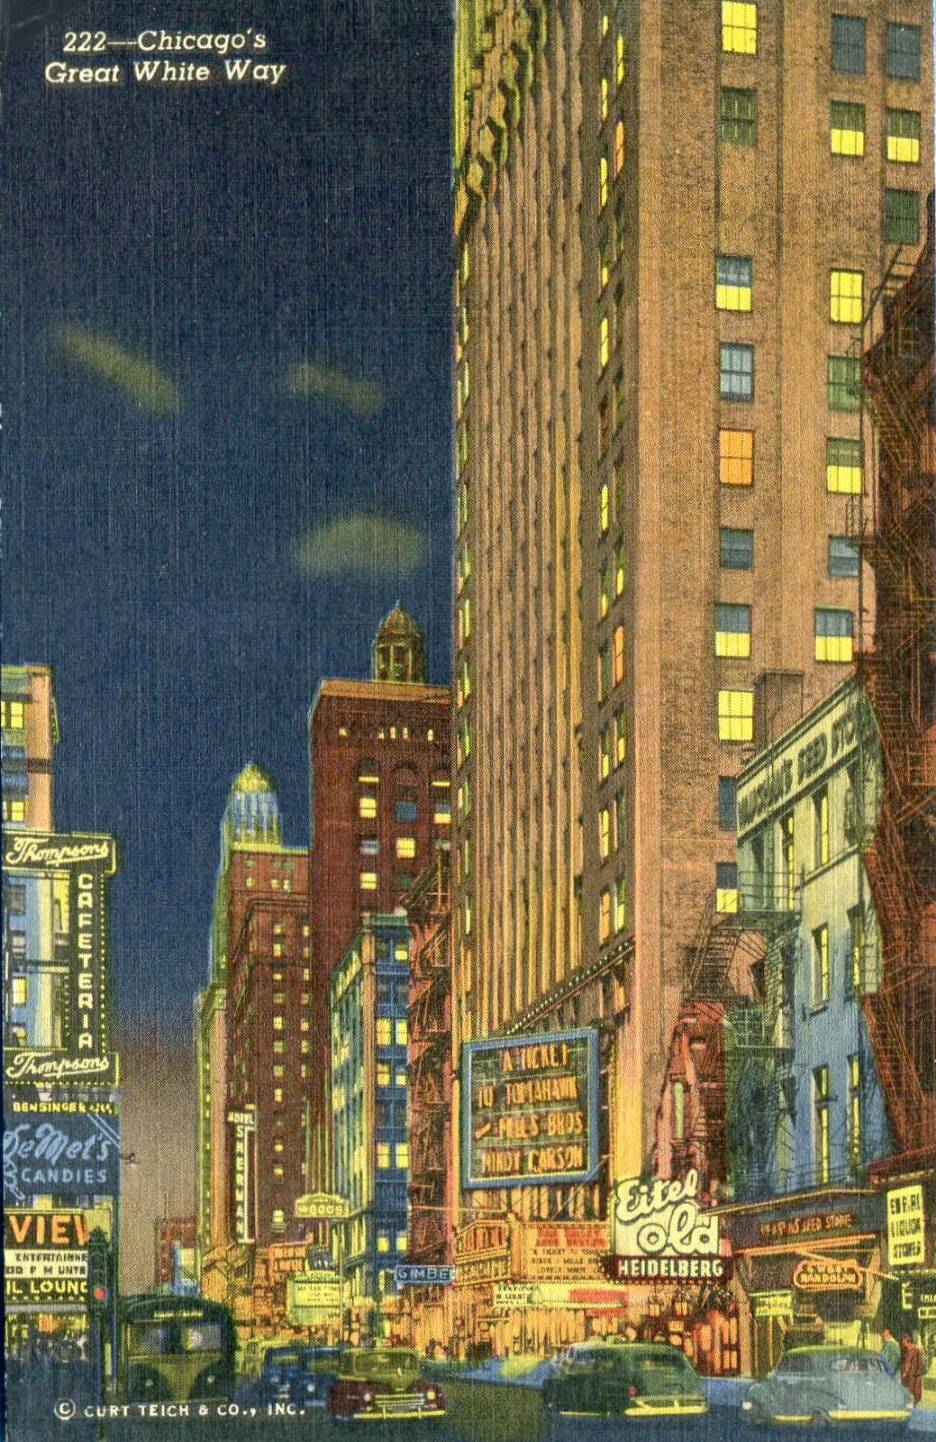 POSTCARD - CHICAGO - RANDOLPH - LOOKING W FROM STATE - DE MET'S - THOMPSONS CAFETERIA - EITEL - VAUGHN SEEDS - EVENING - 1954